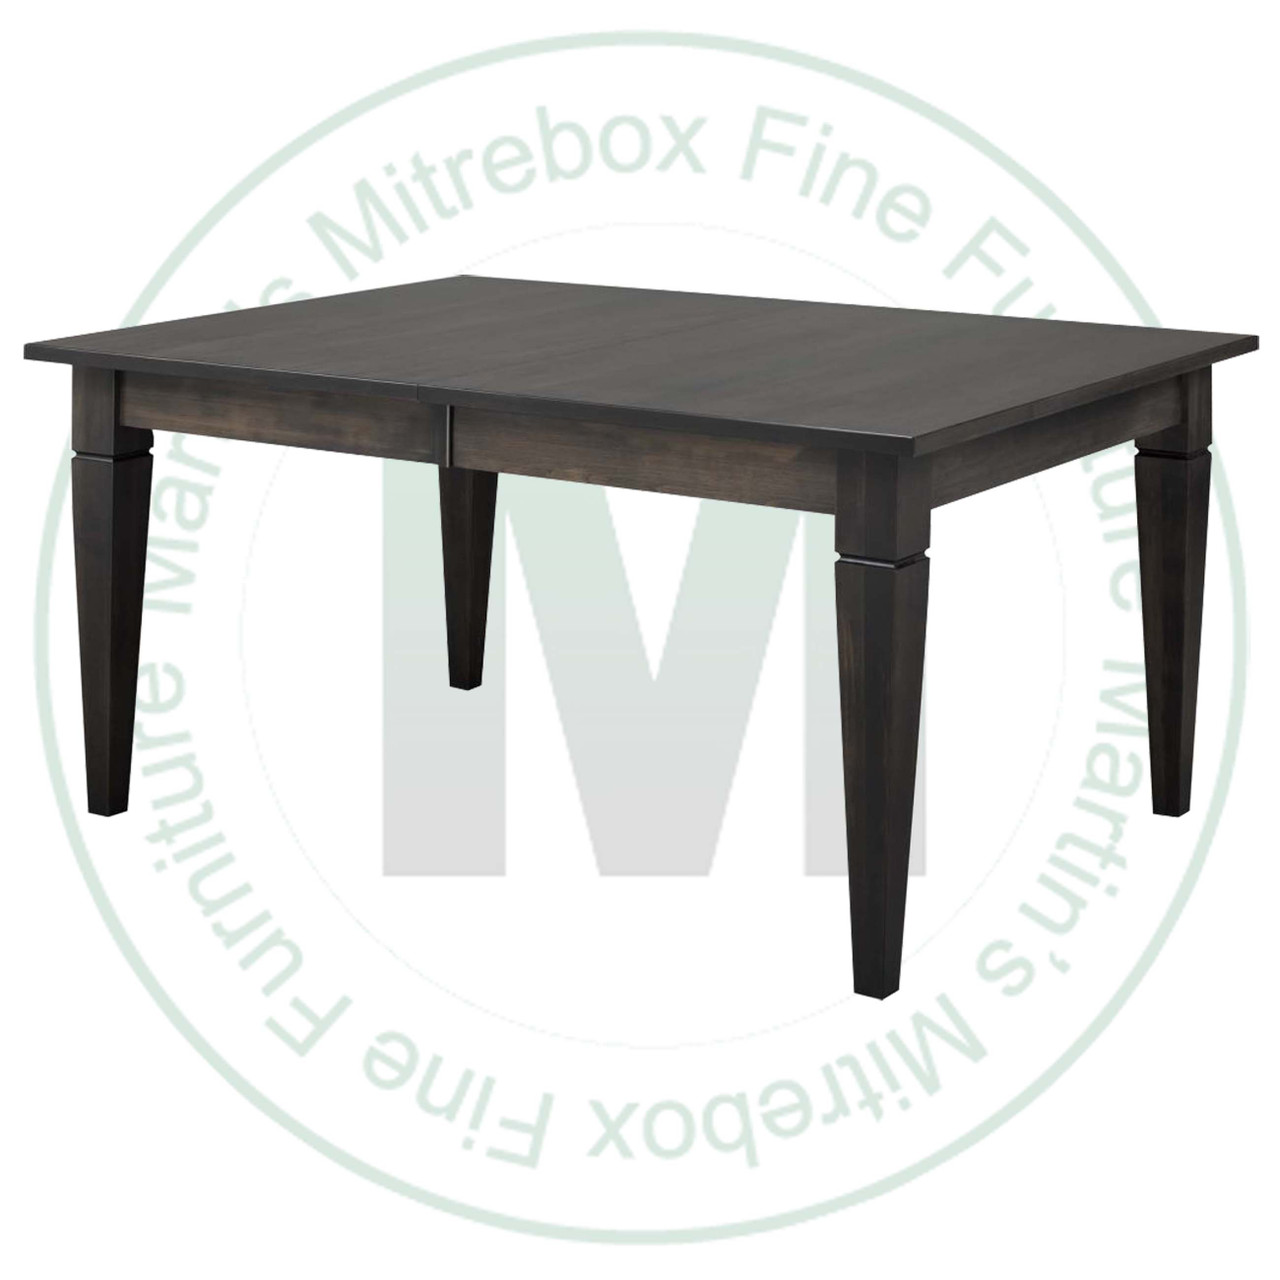 Wormy Maple Reesor Solid Top Harvest Table 42''D x 84''W x 30''H Table Has 1.25'' Thick Top And 2 - 16'' Extensions